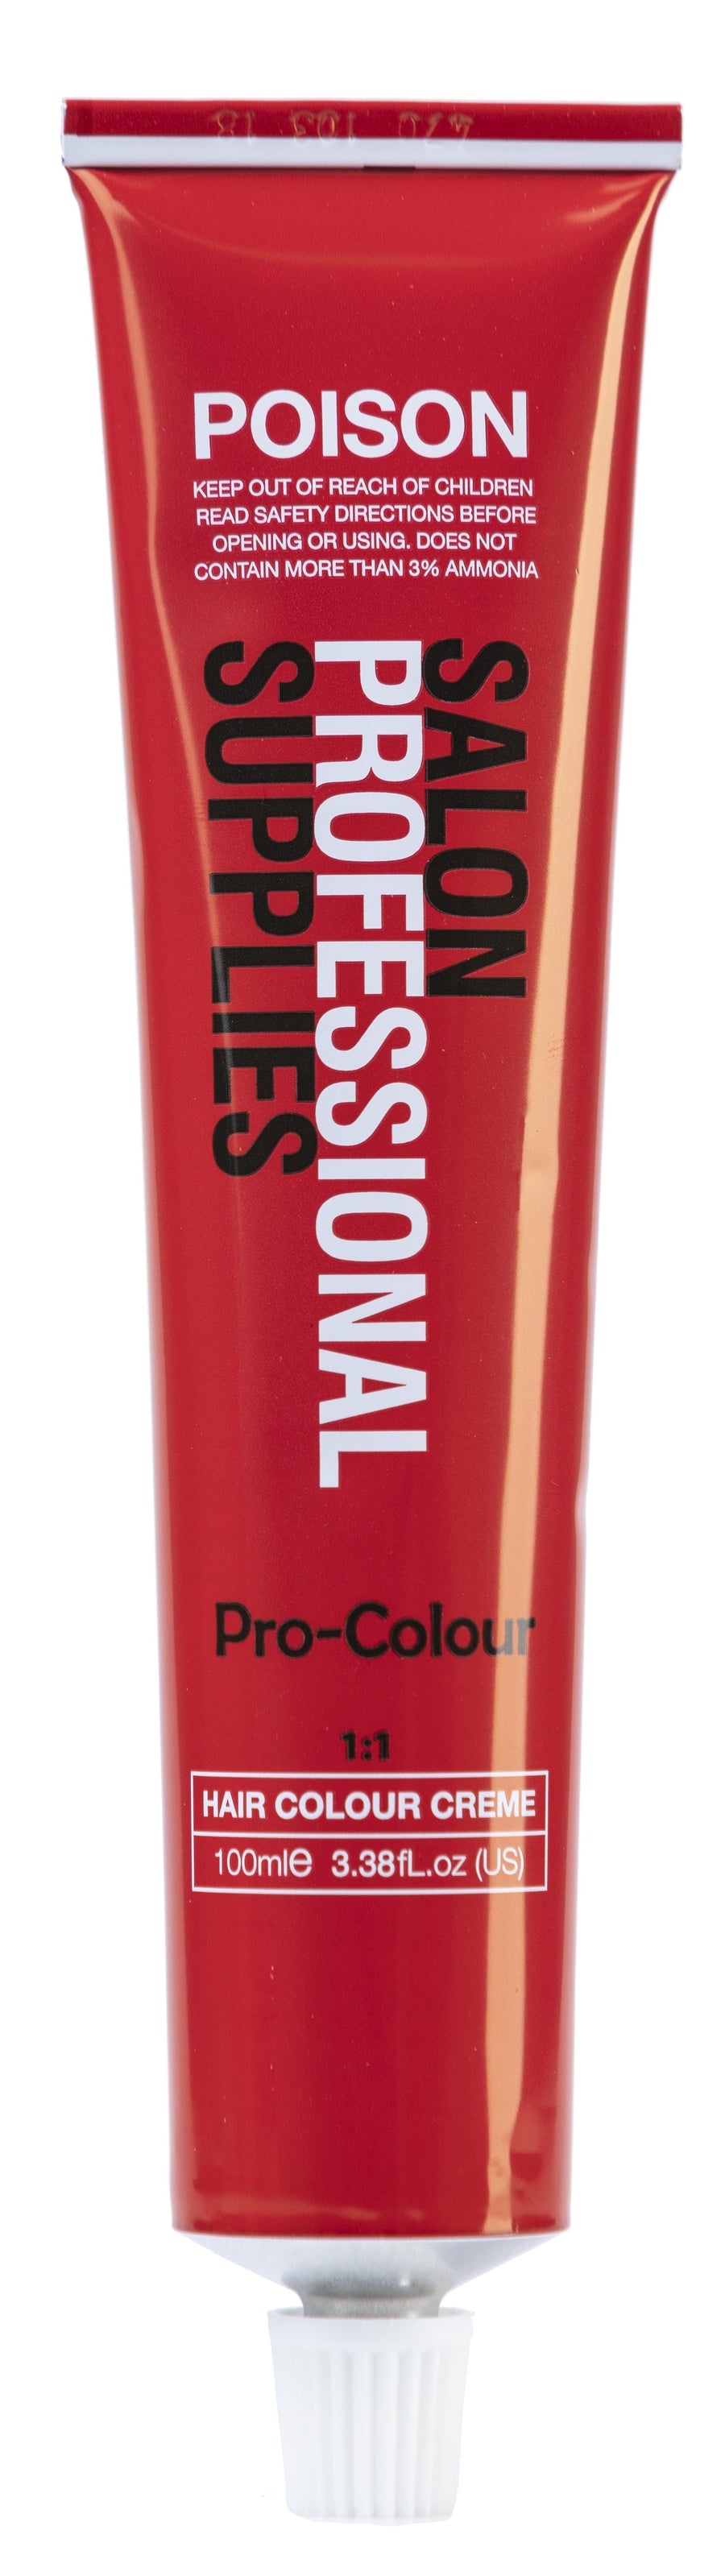 SPS Tint 11.89 Ultra Light Pearl Cendre Blonde 100ml - Price Attack